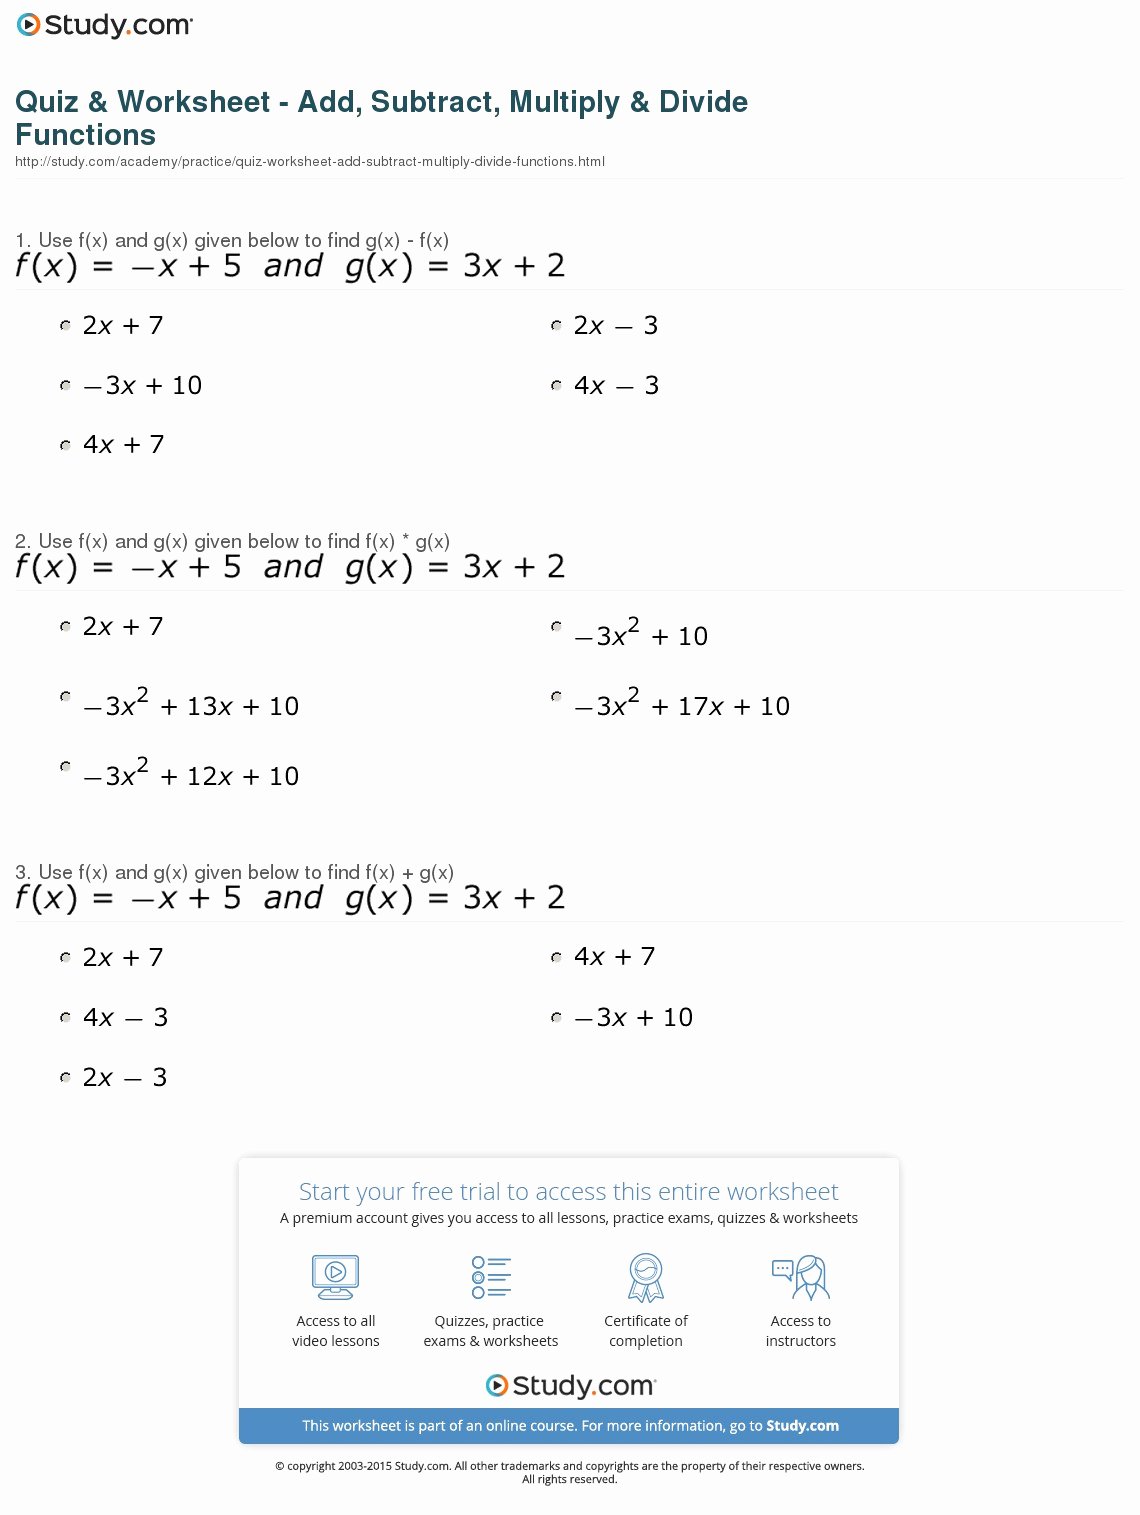 quiz worksheet add subtract multiply divide functions